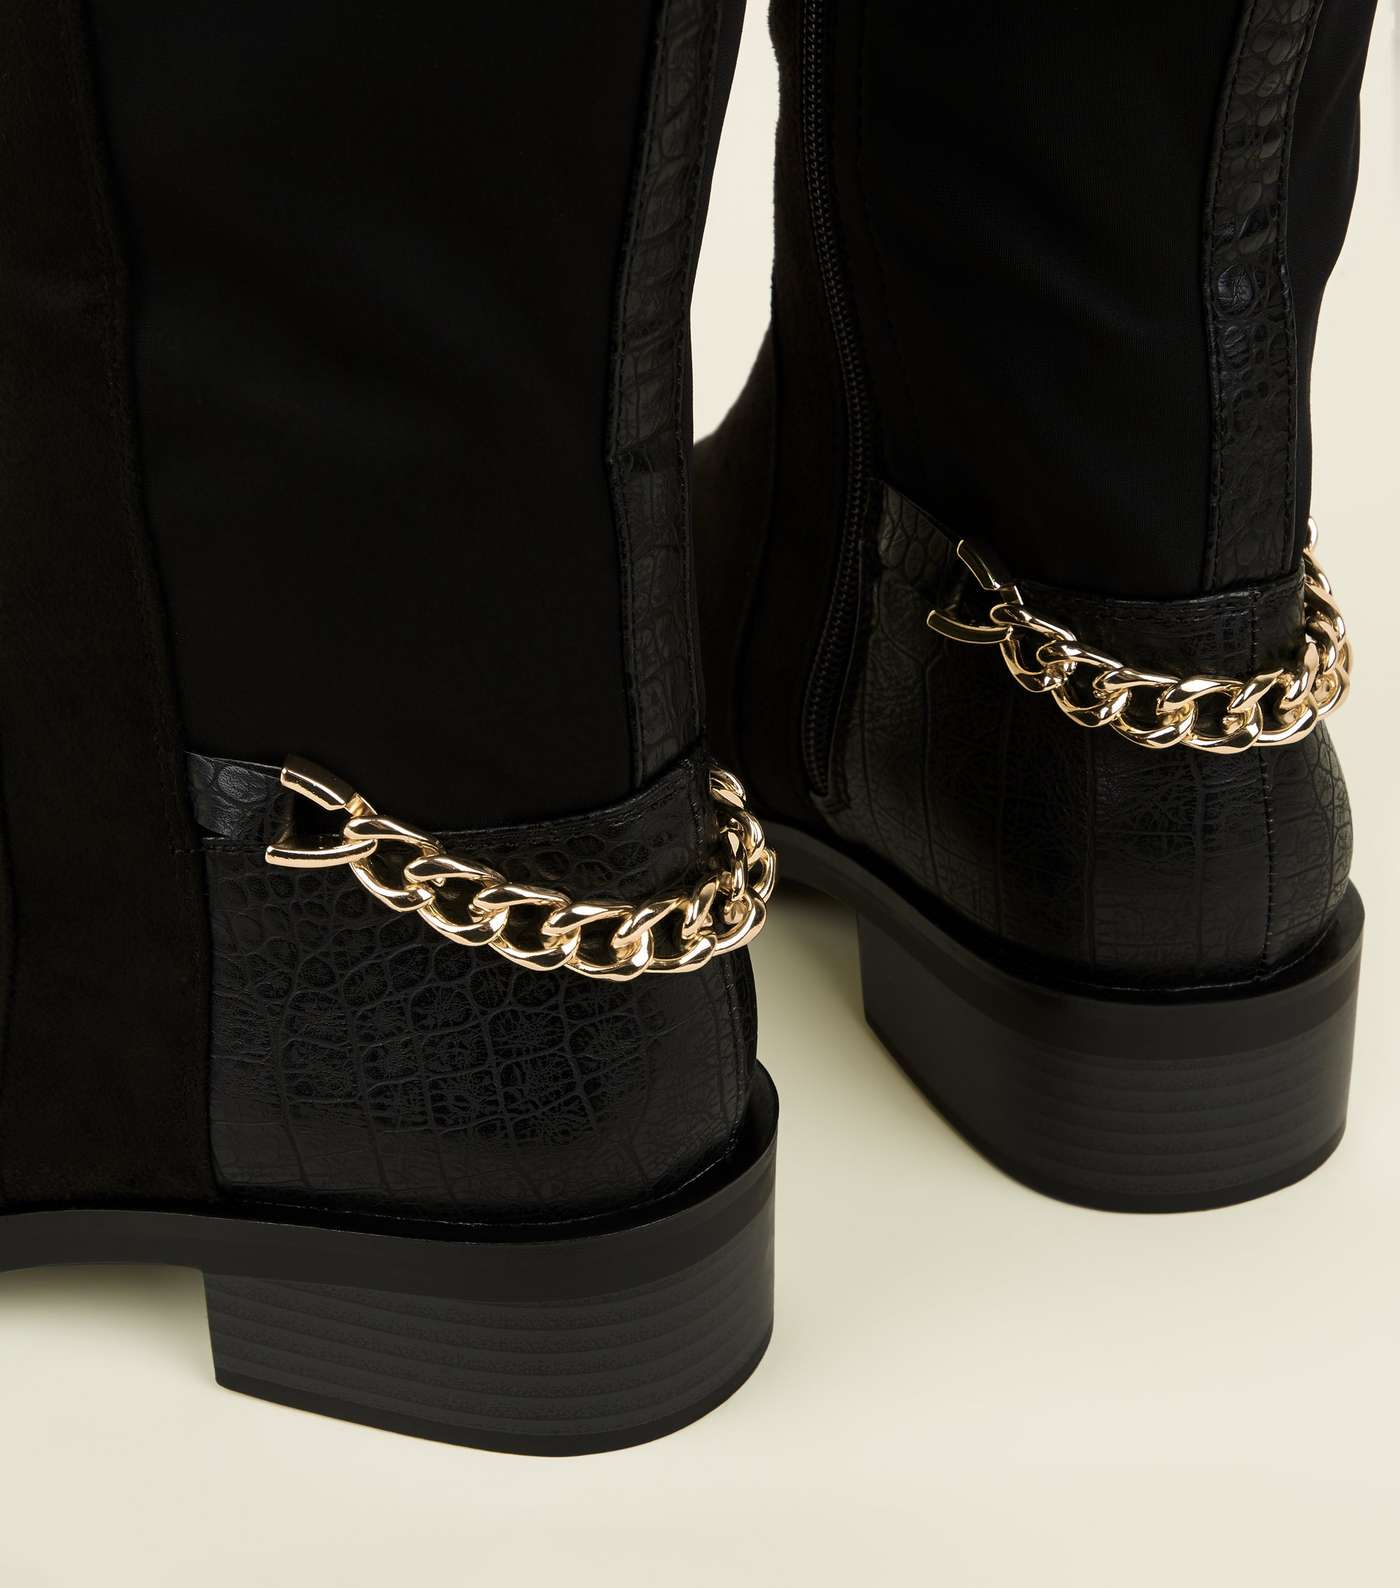 Black Suedette Chain Strap Knee High Boots Image 3